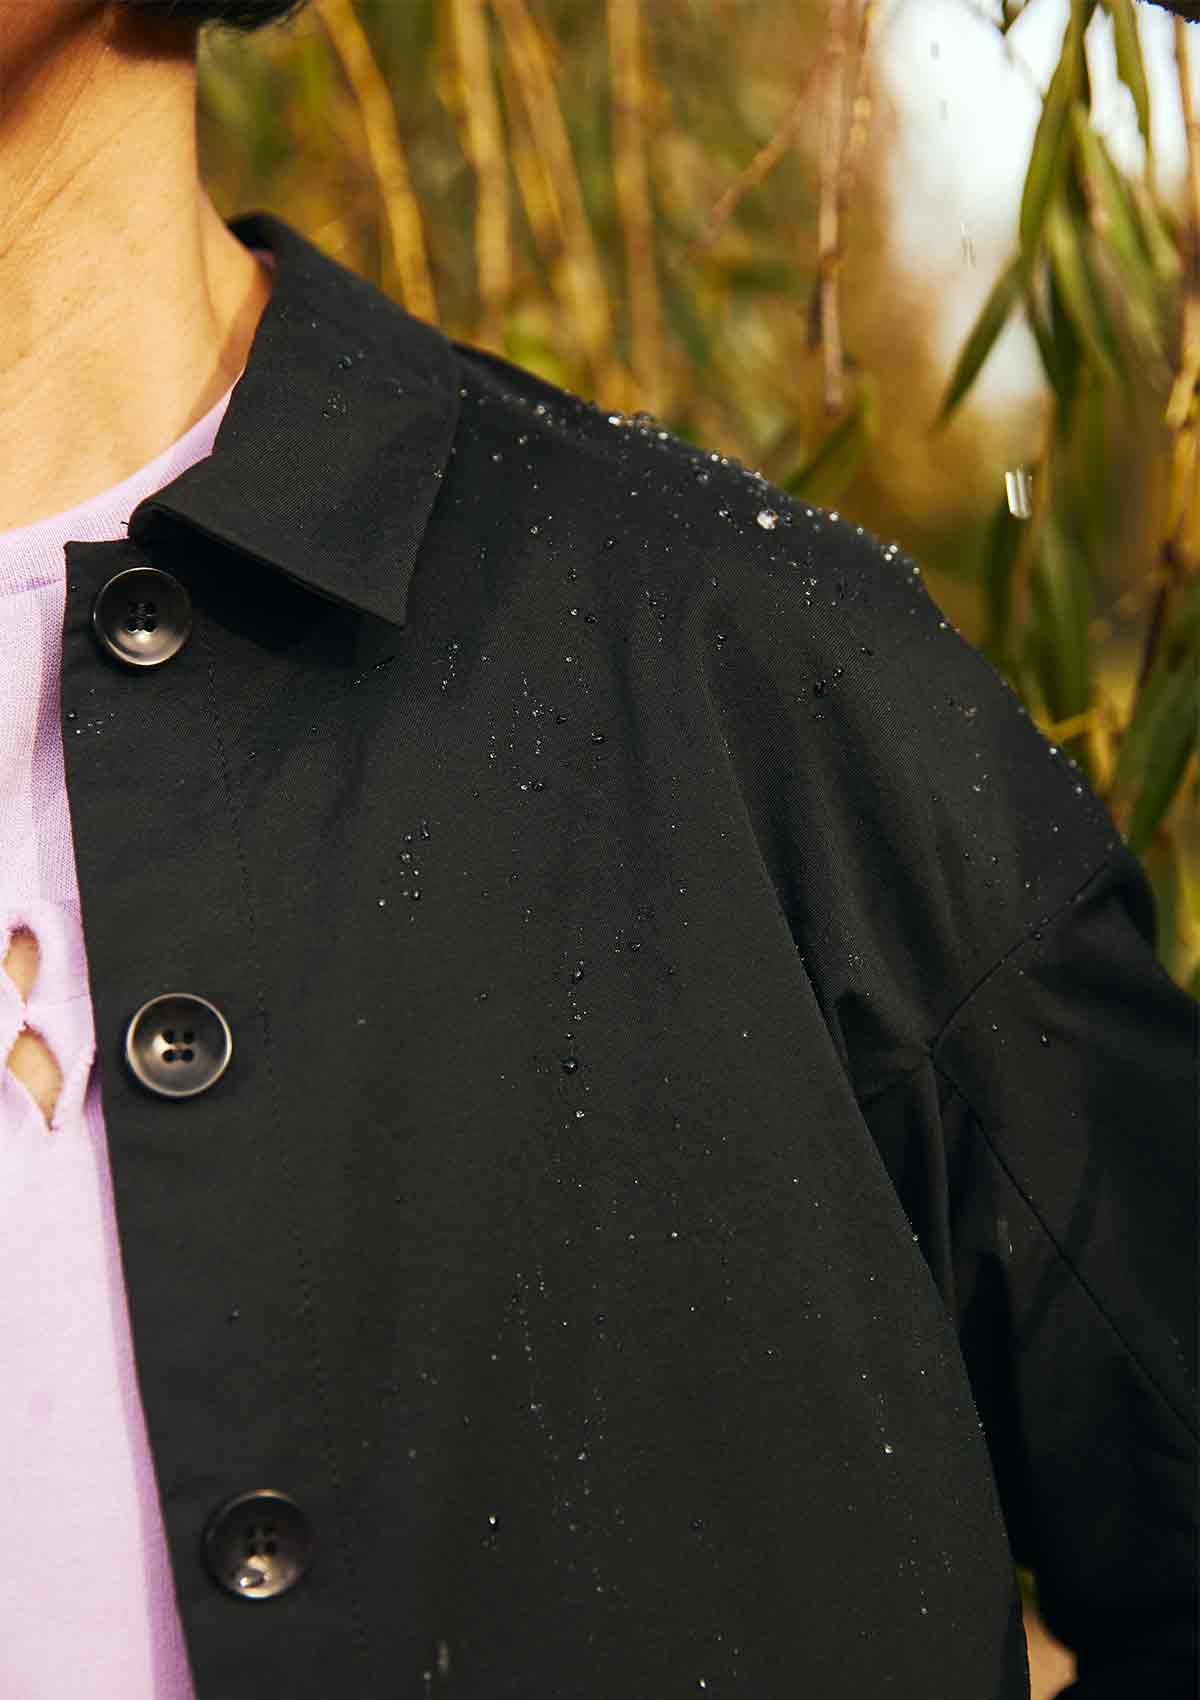 Close up of the left shoulder of a woman wearing the Asmuss Roam Jacket showing water beading on the Bio Castor Bean fabric, showing the water resistance of the fabric